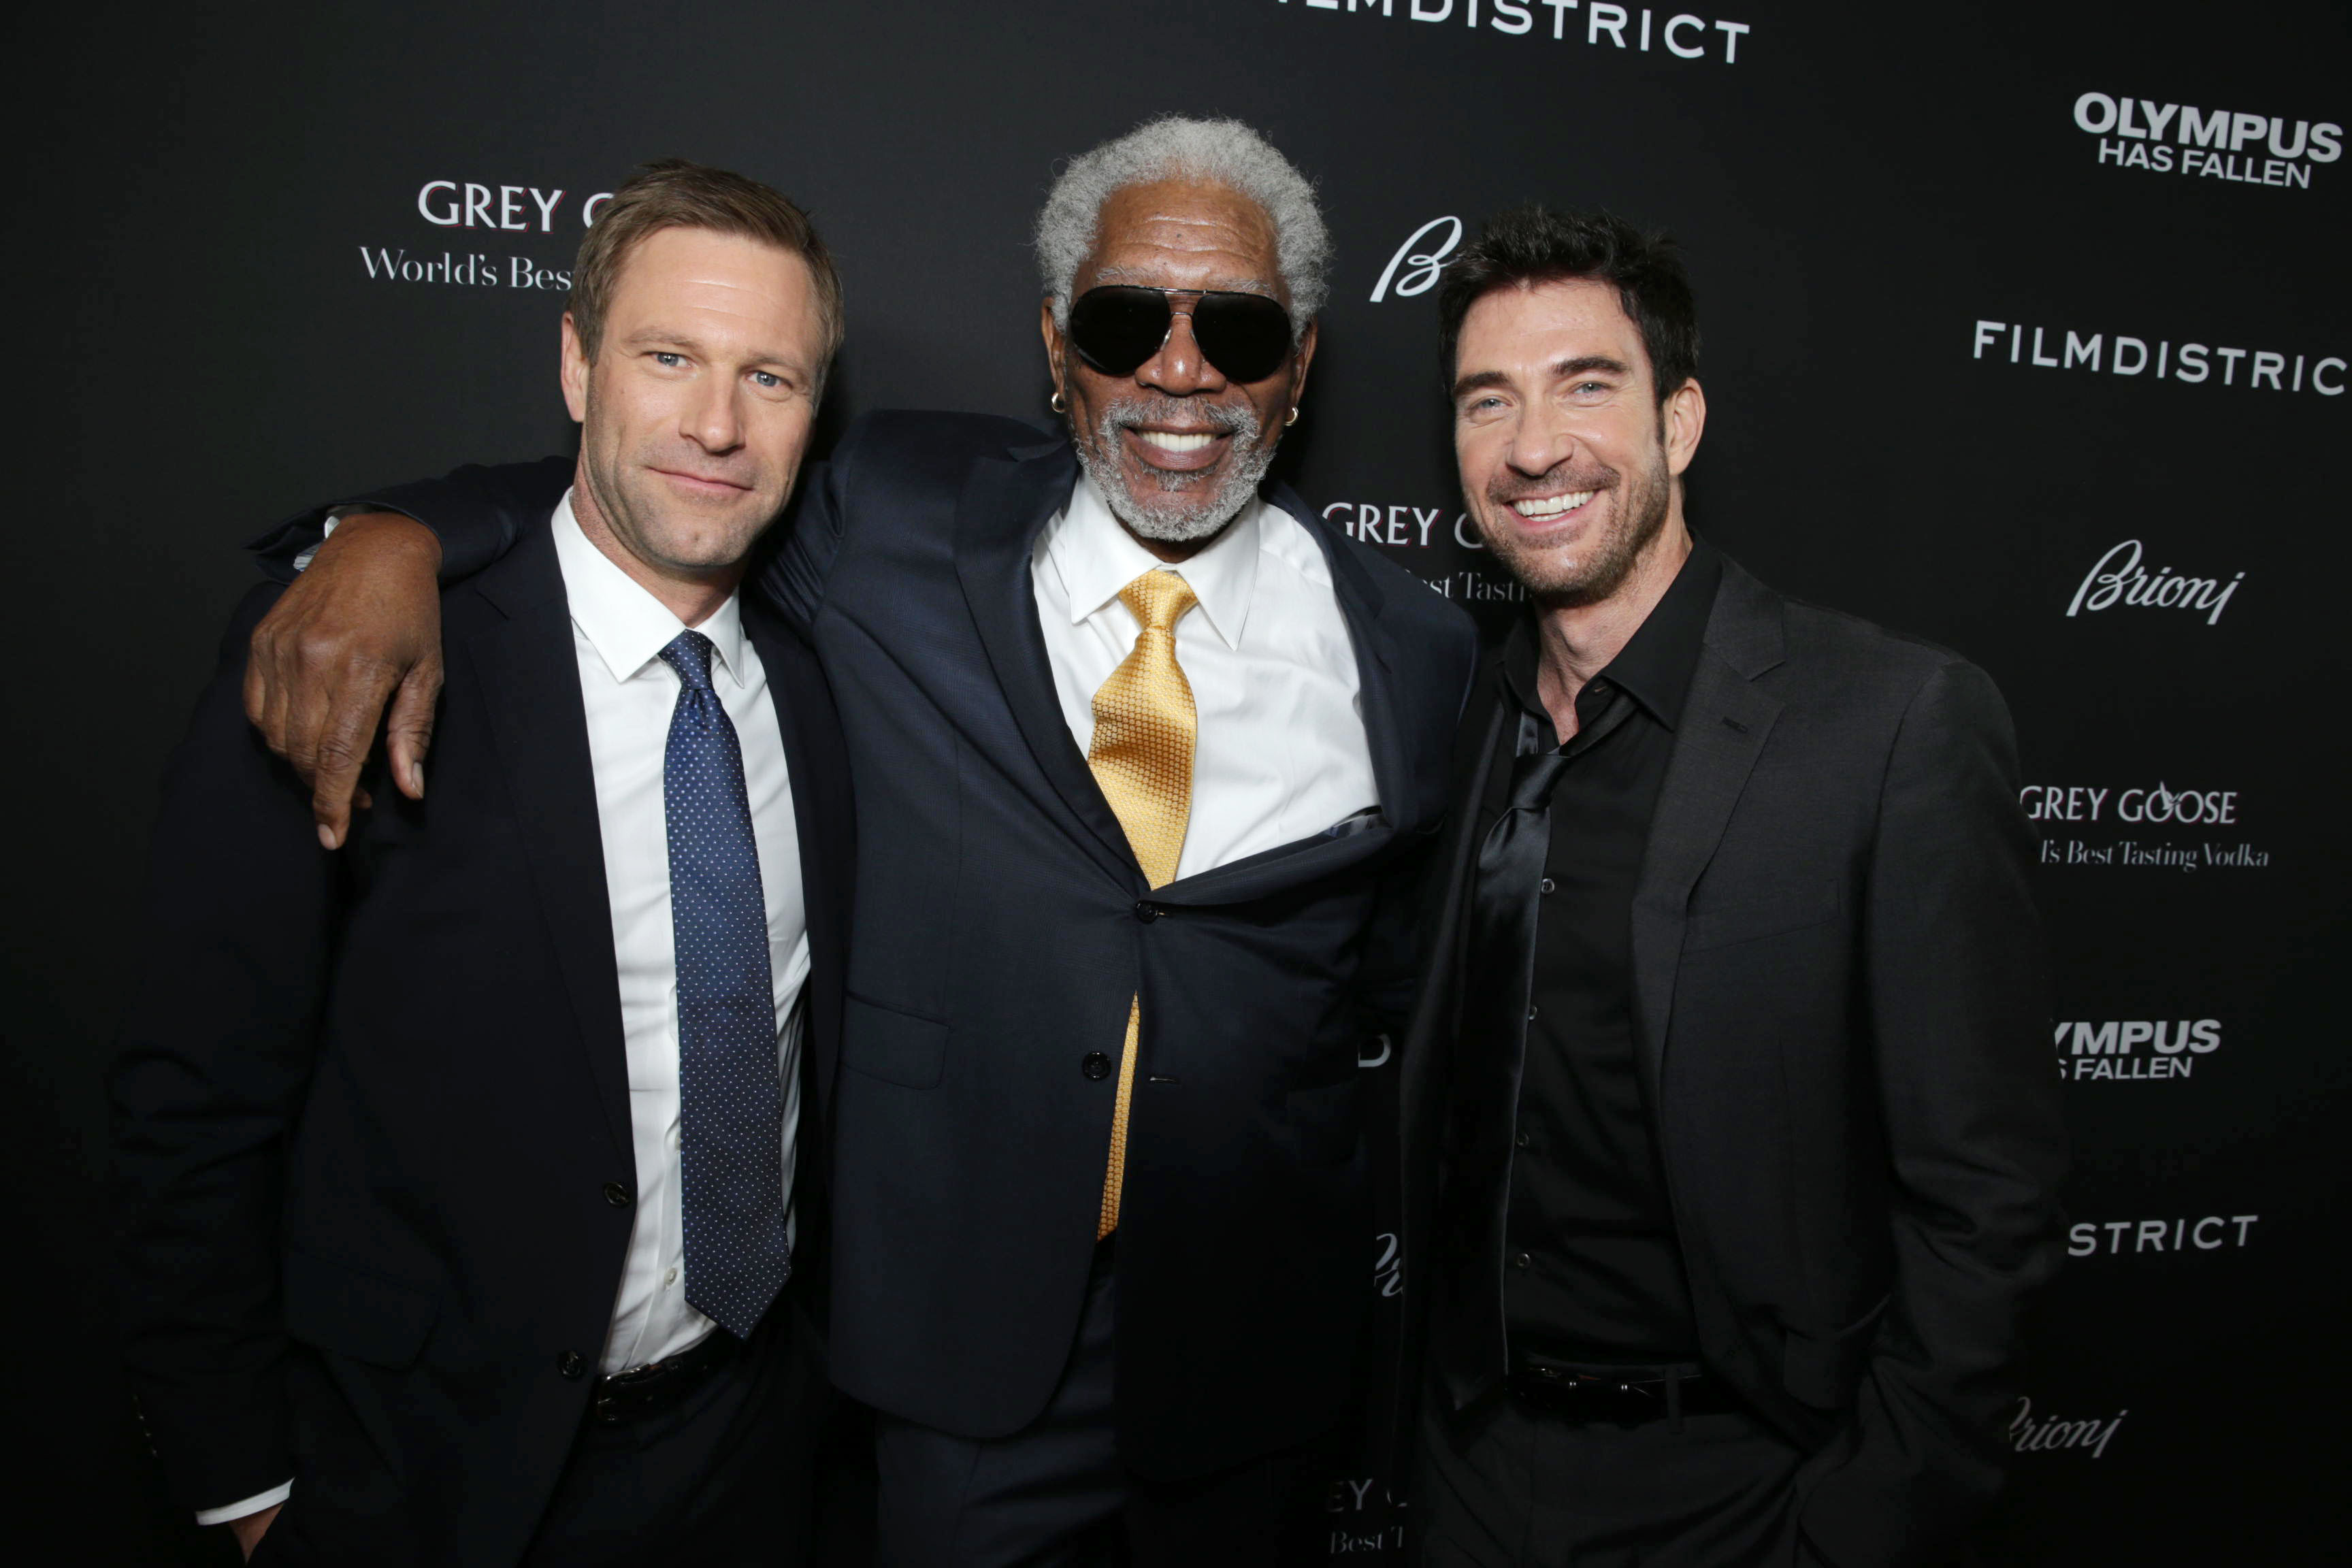 Aaron Eckhart, Morgan Freeman, Dylan McDermott - FilmDistrict's Premiere of 'Olympus Has Fallen' hosted by Brioni and Grey Goose at the ArcLight Hollywood, on Monday, March, 18, 2013 in Los Angeles. (Photo by Eric Charbonneau/Invision for FilmDistrict/AP Images)